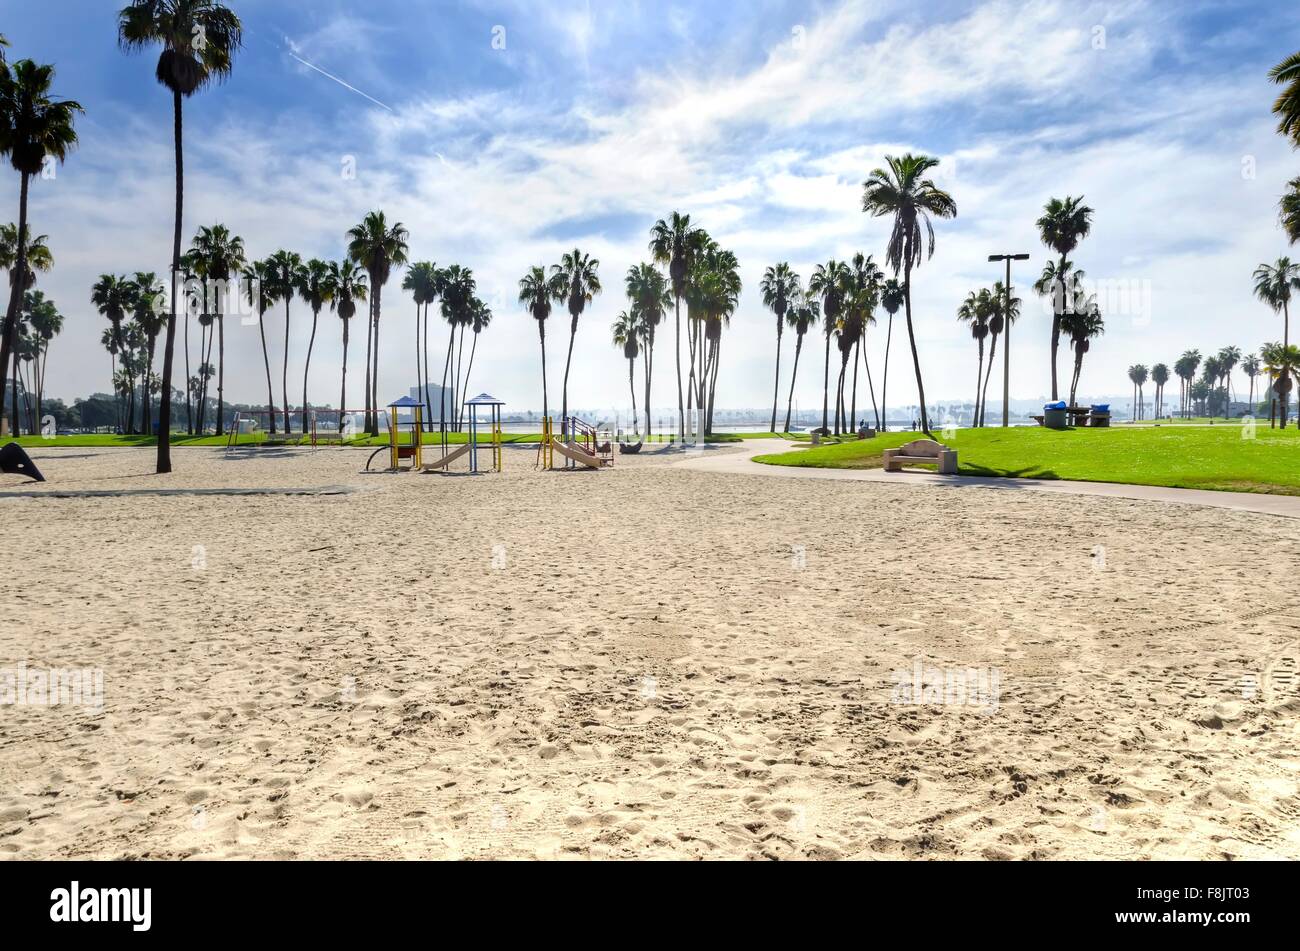 The Bonita cove park in southern Mission Bay over the Pacific beach in San Diego, California in the United States of America. A Stock Photo